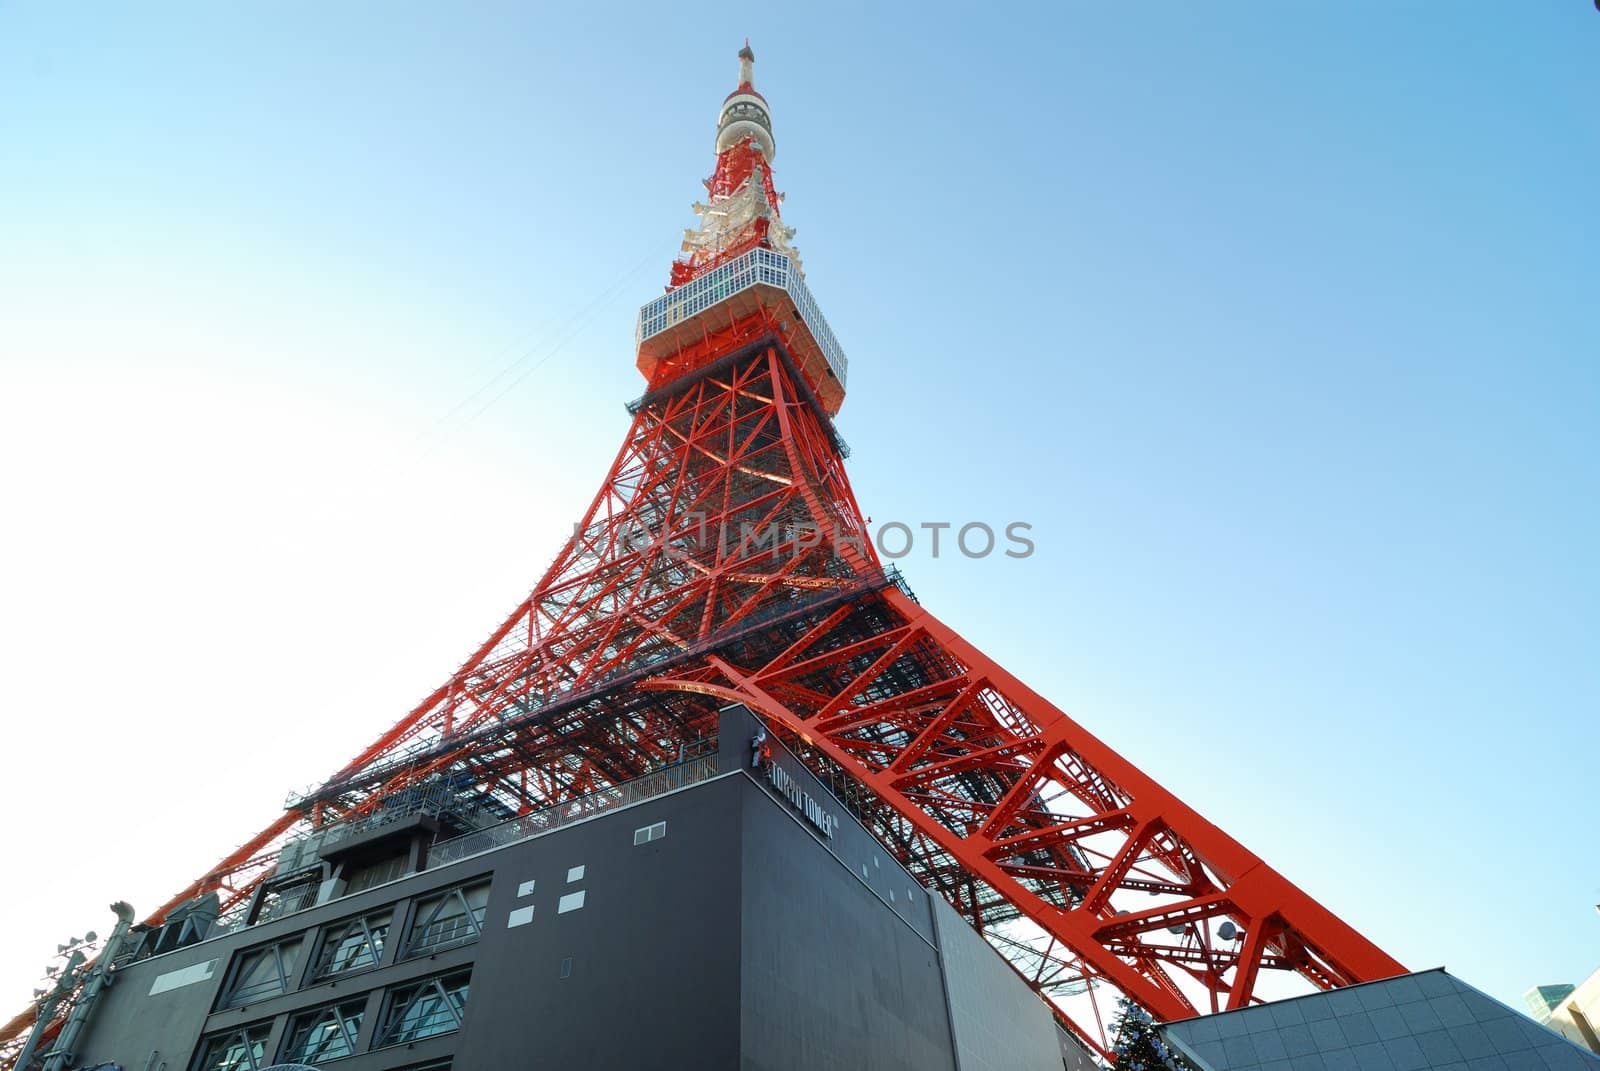 Tokyo tower by yuriz